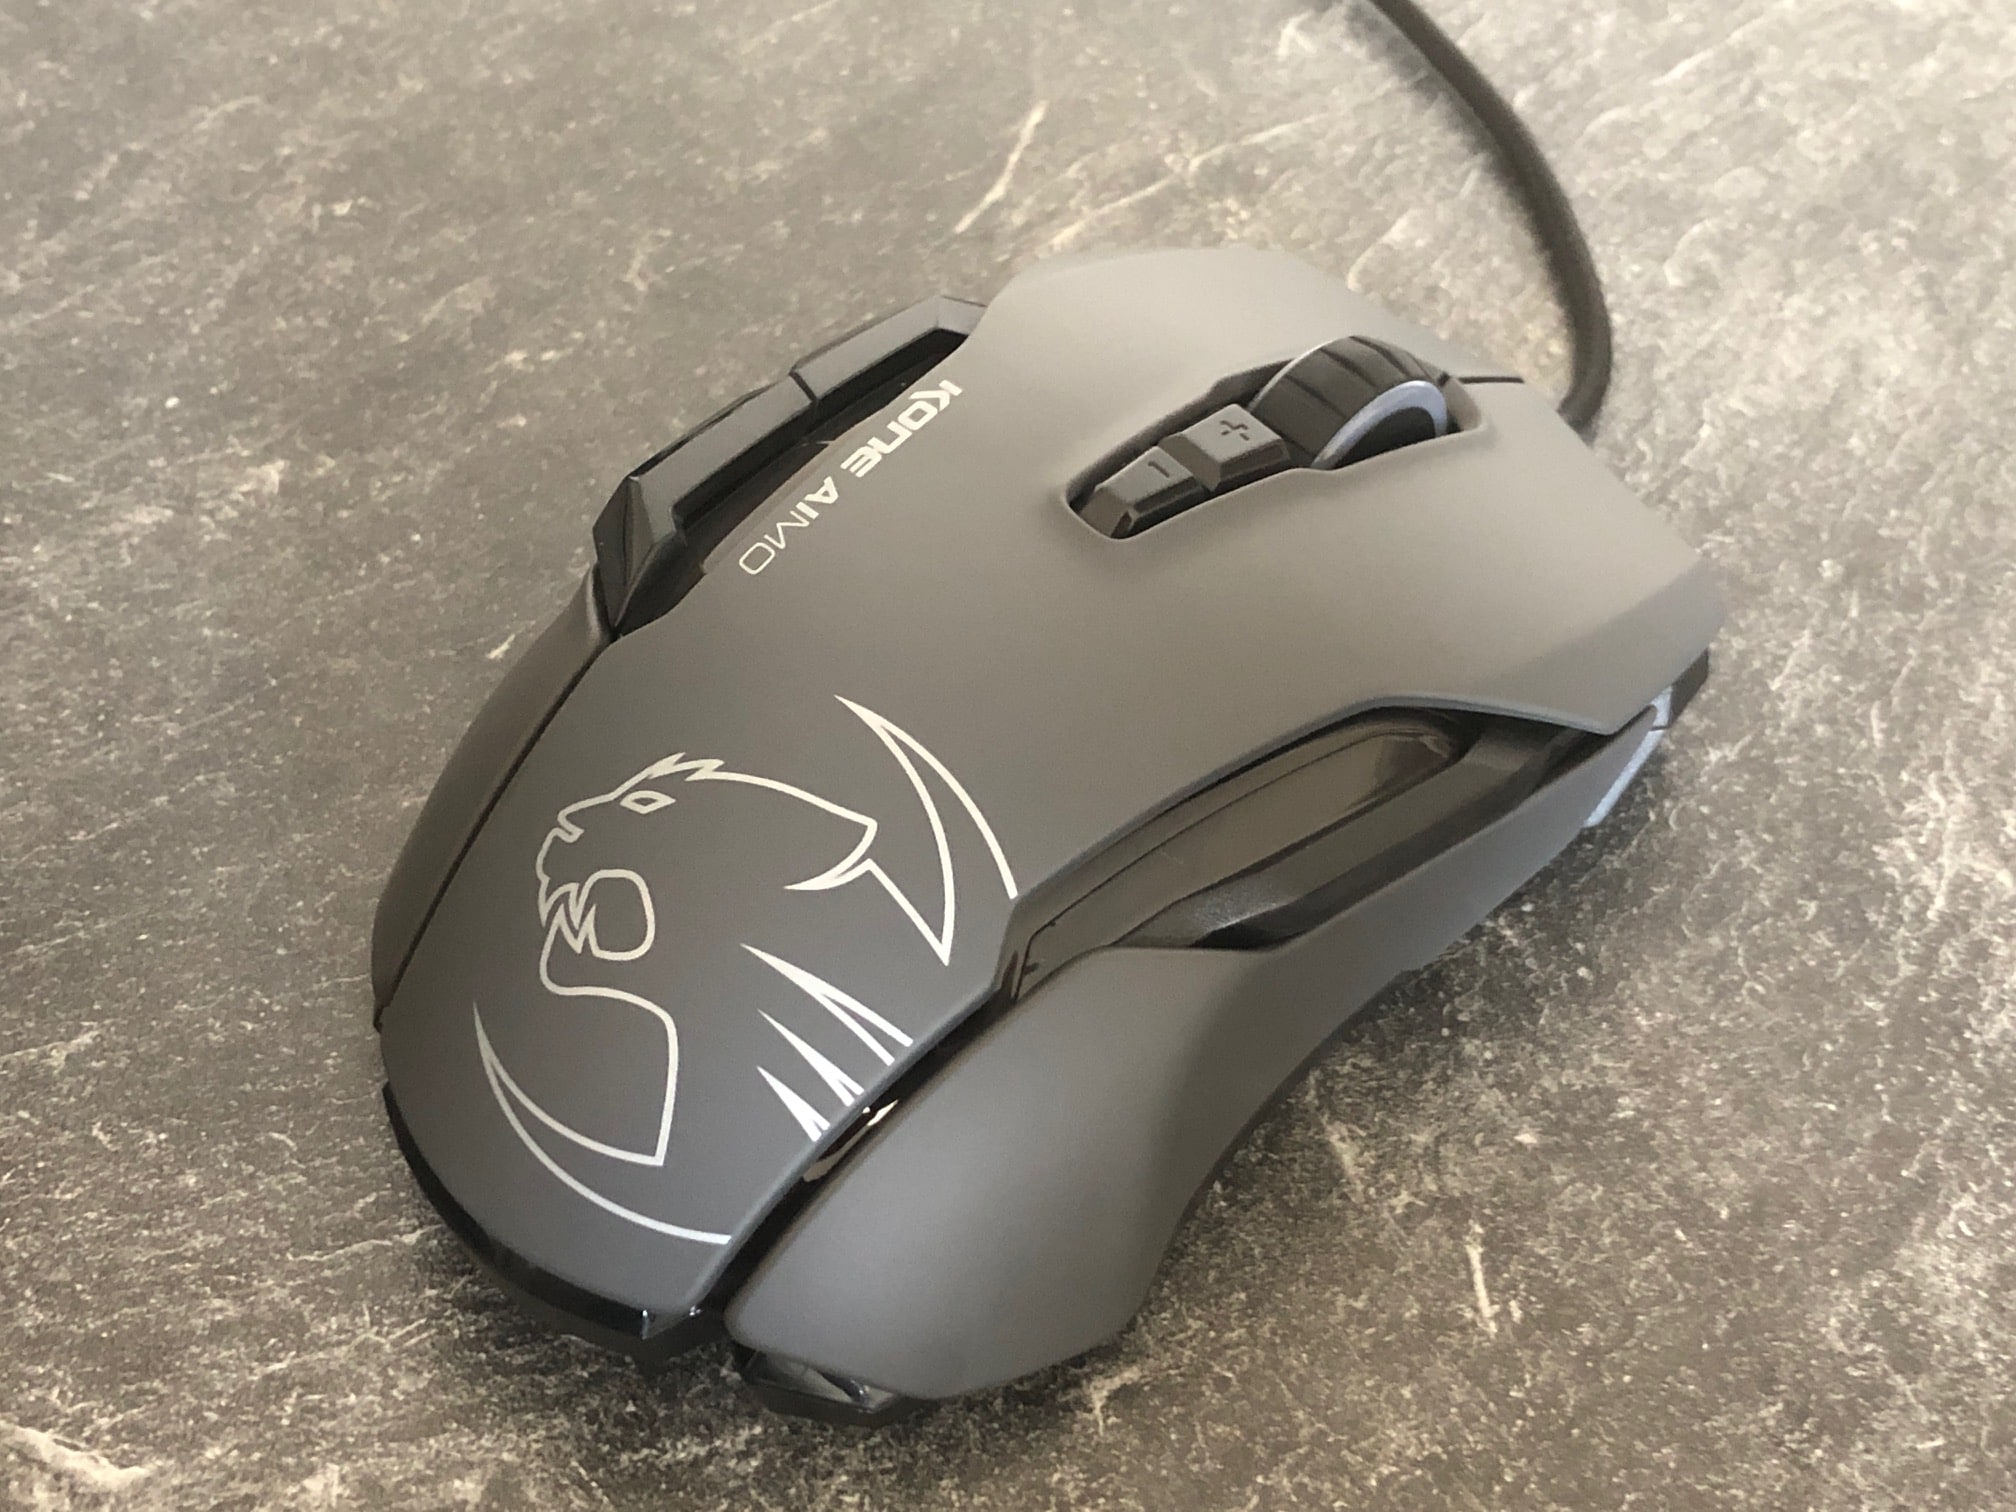 Roccat Kone Aimo gaming mouse review < NAG